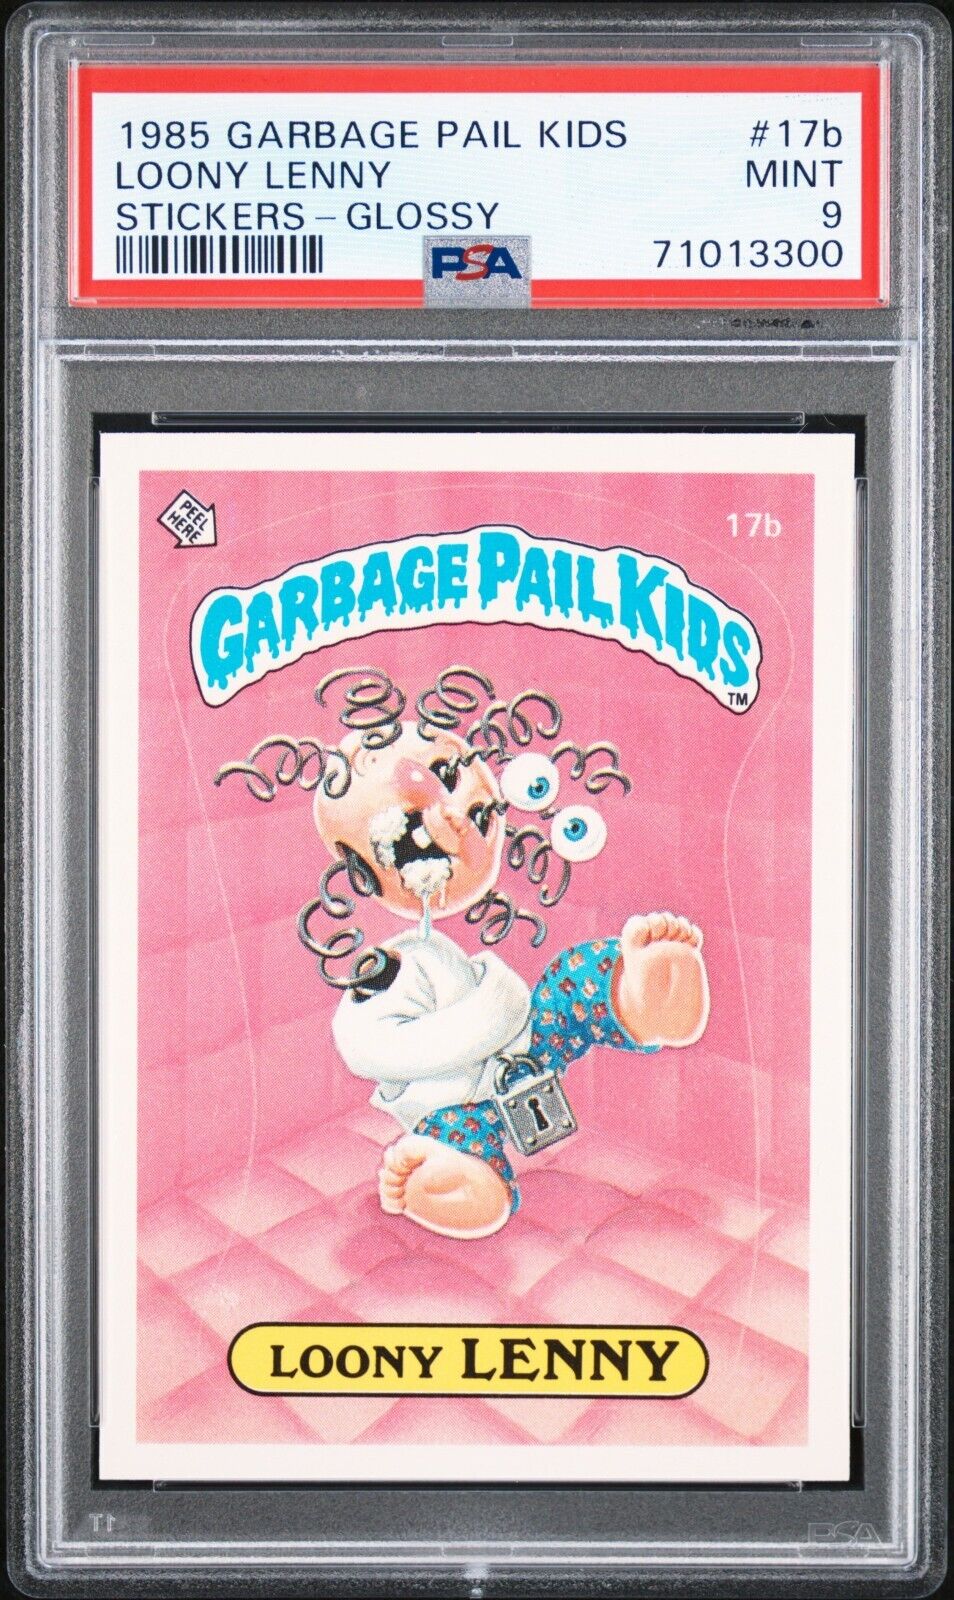 1985 Topps OS1 Garbage Pail Kids Series 1 LOONY LENNY 17b GLOSSY Card PSA 9 MINT